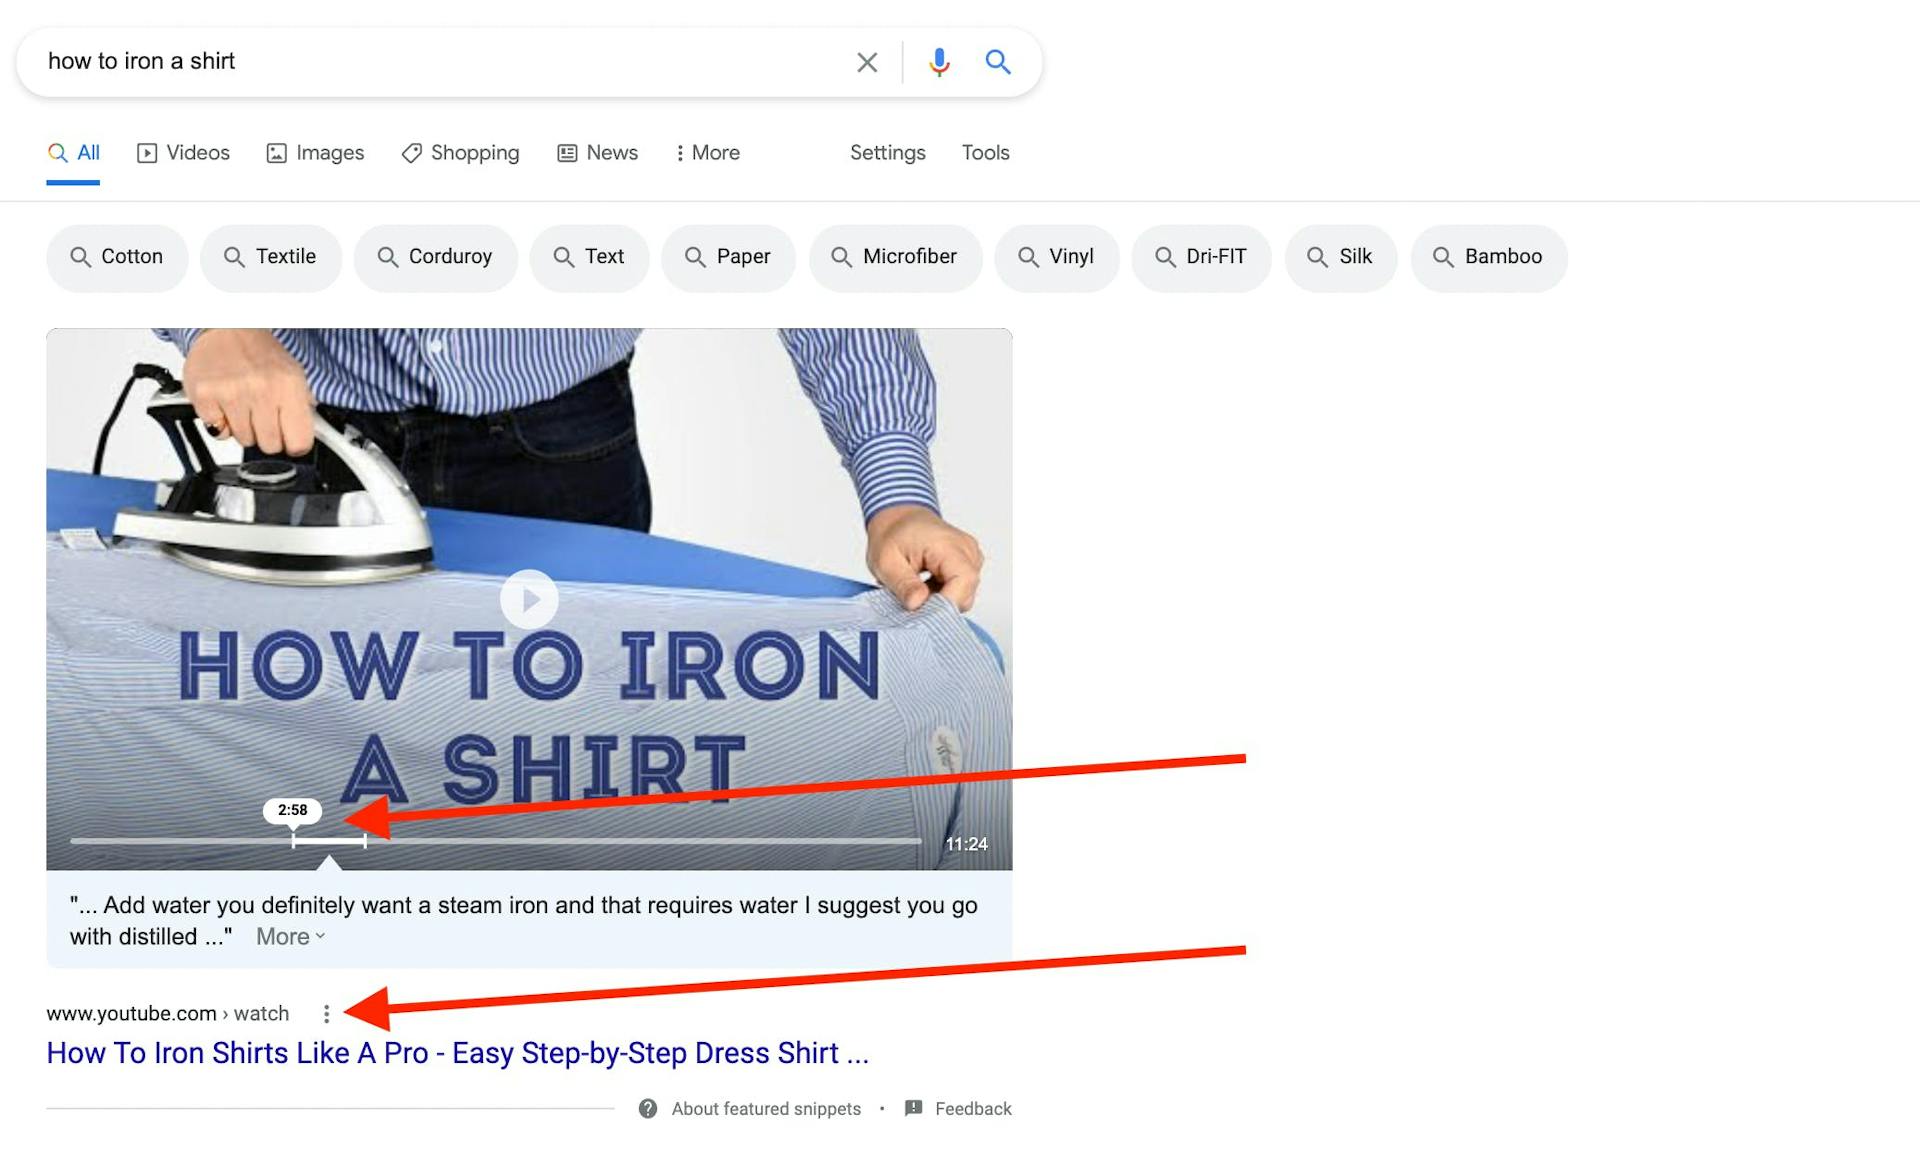 Google search result for the keyword "how to iron a shirt" showing a suggested timestamp to answer that specific question